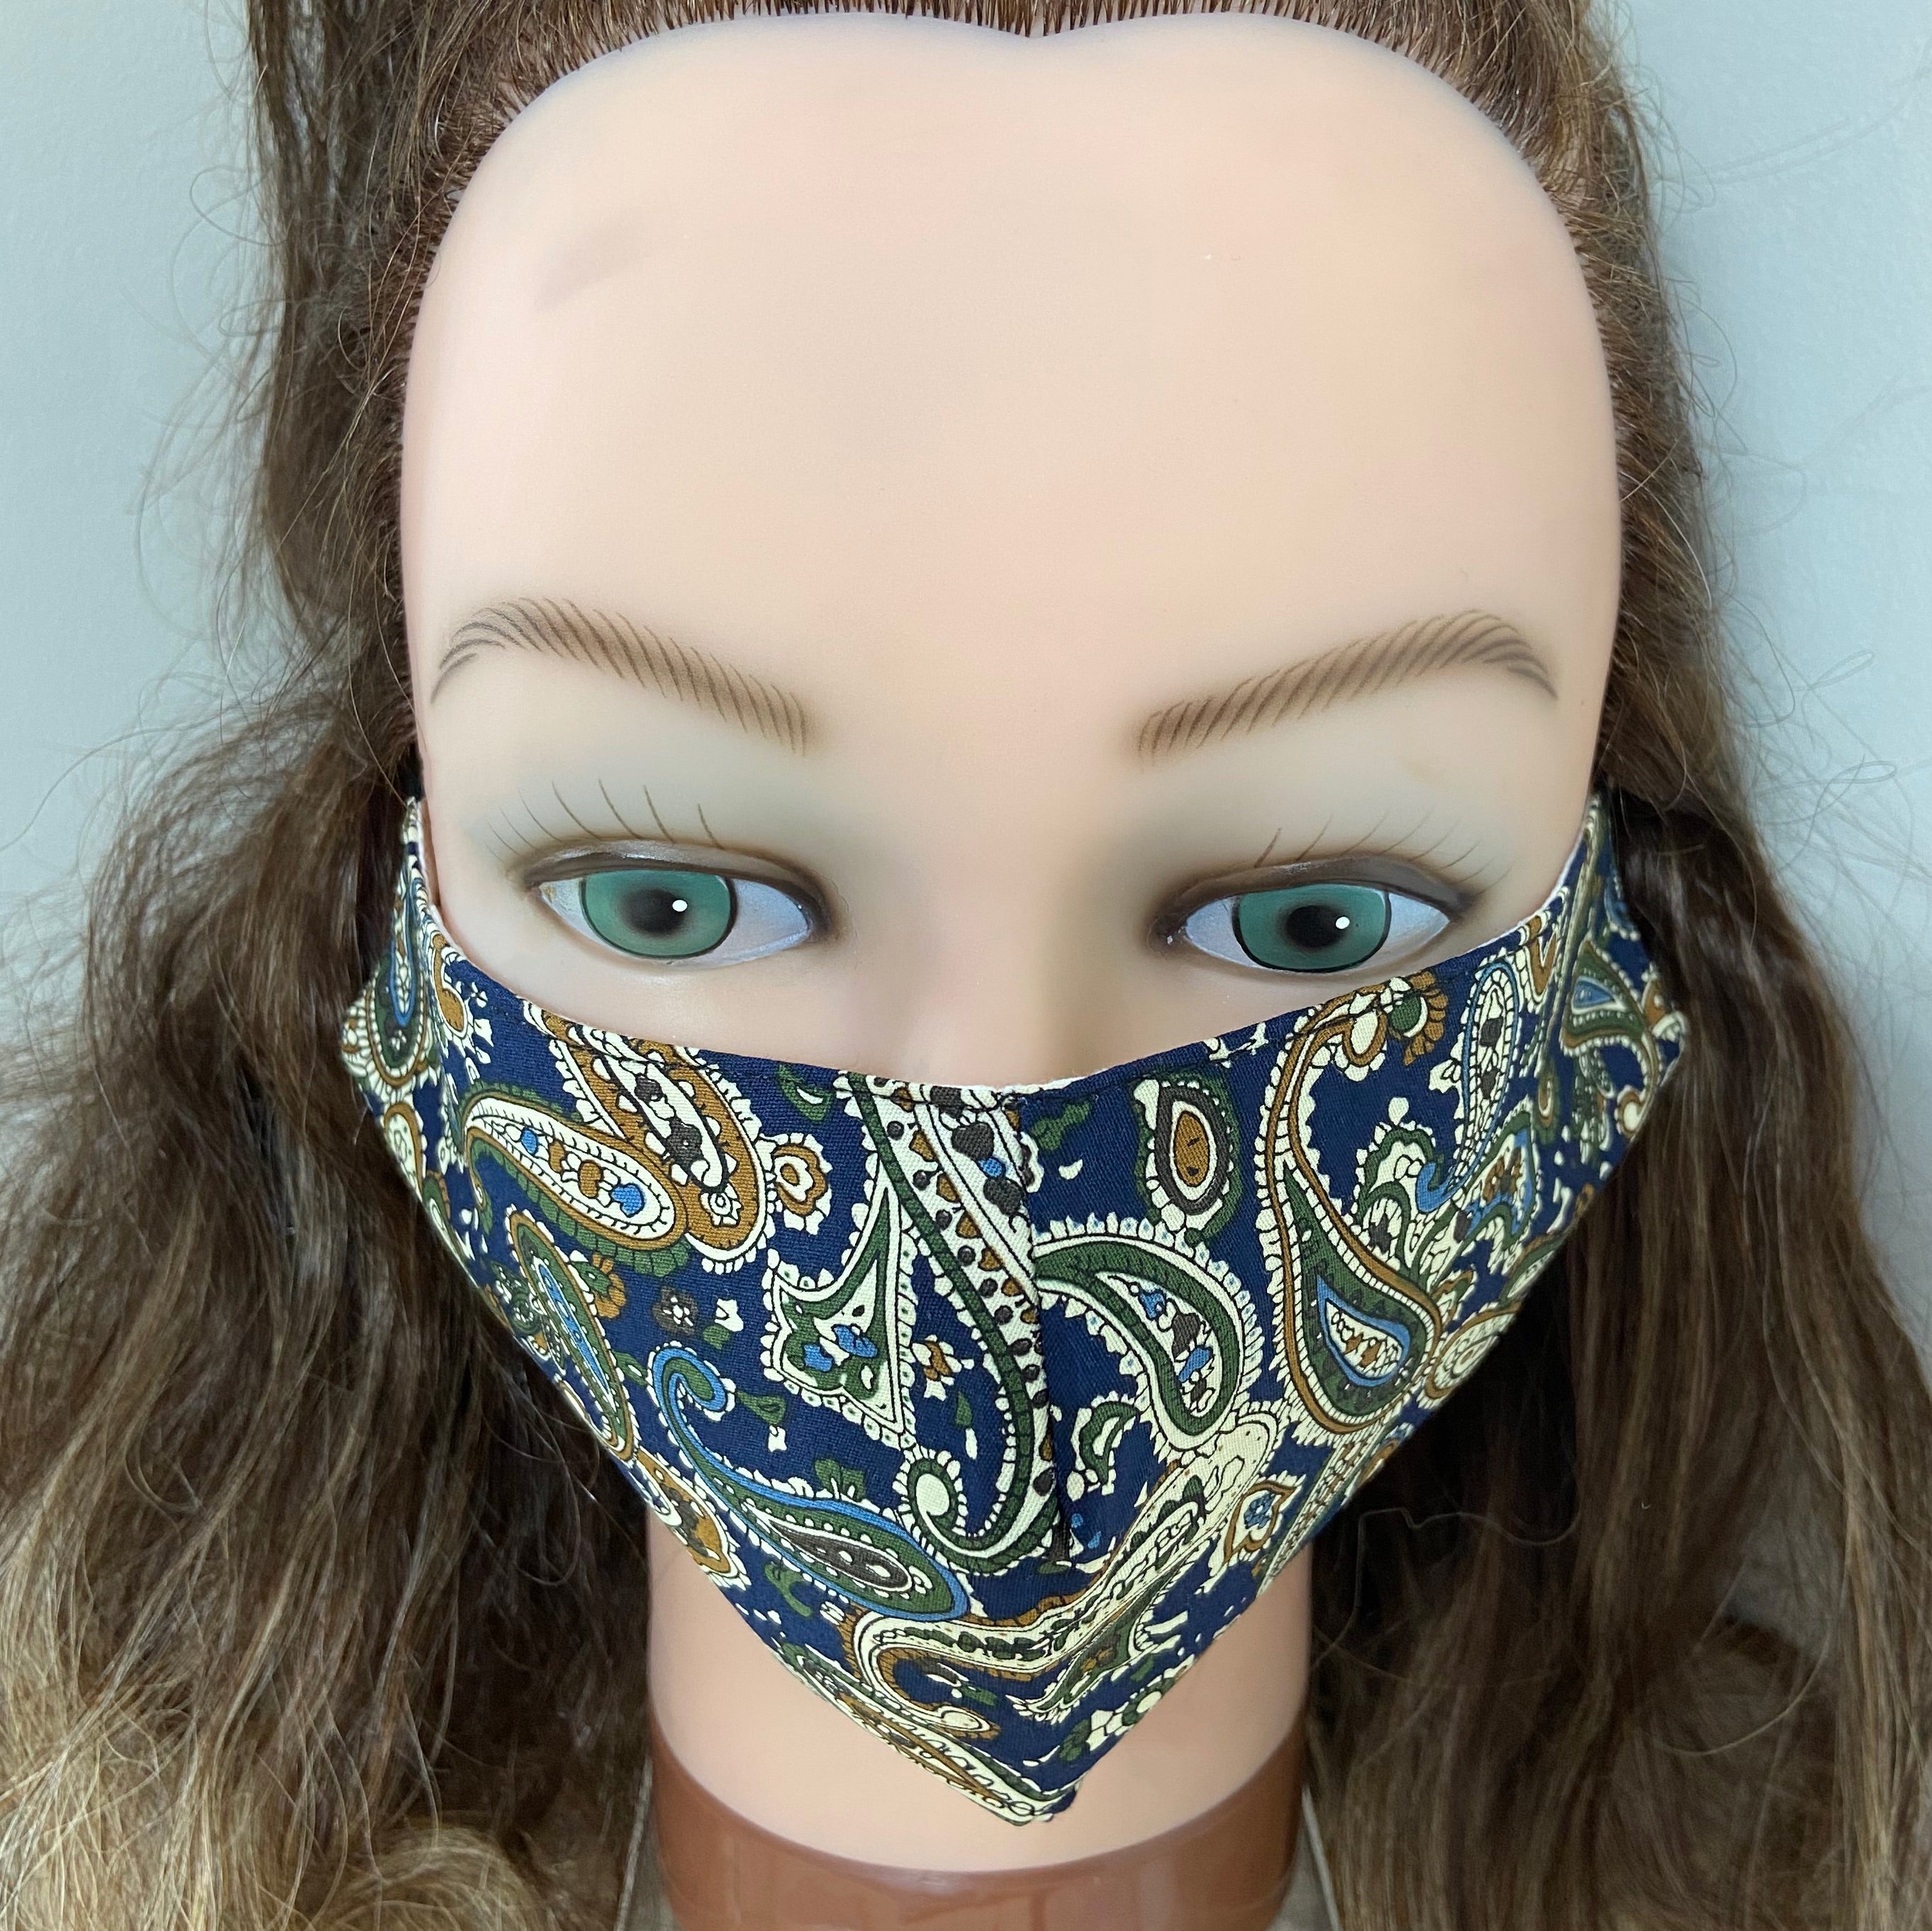 Vintage-inspired cotton face mask with adjustable earstrings